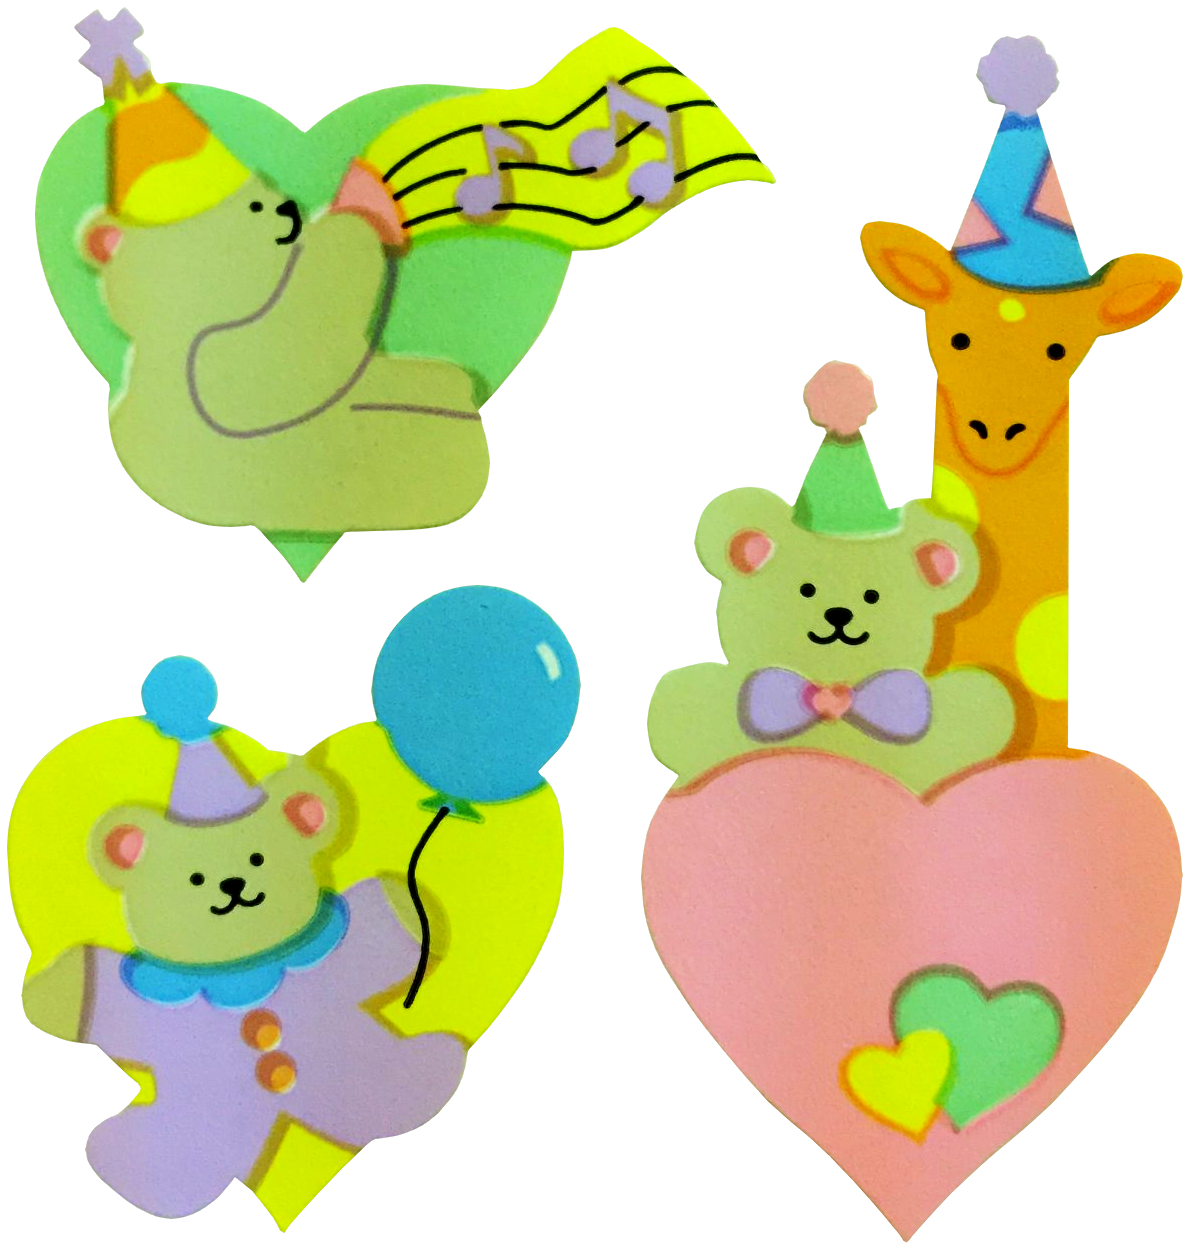 A heart shaped sticker sheet of bears and a giraffe performing at a circus. They are wearing colorful pastel party hats. One bear plays the trumpet, and another holds a balloon while wearing a clown outfit.